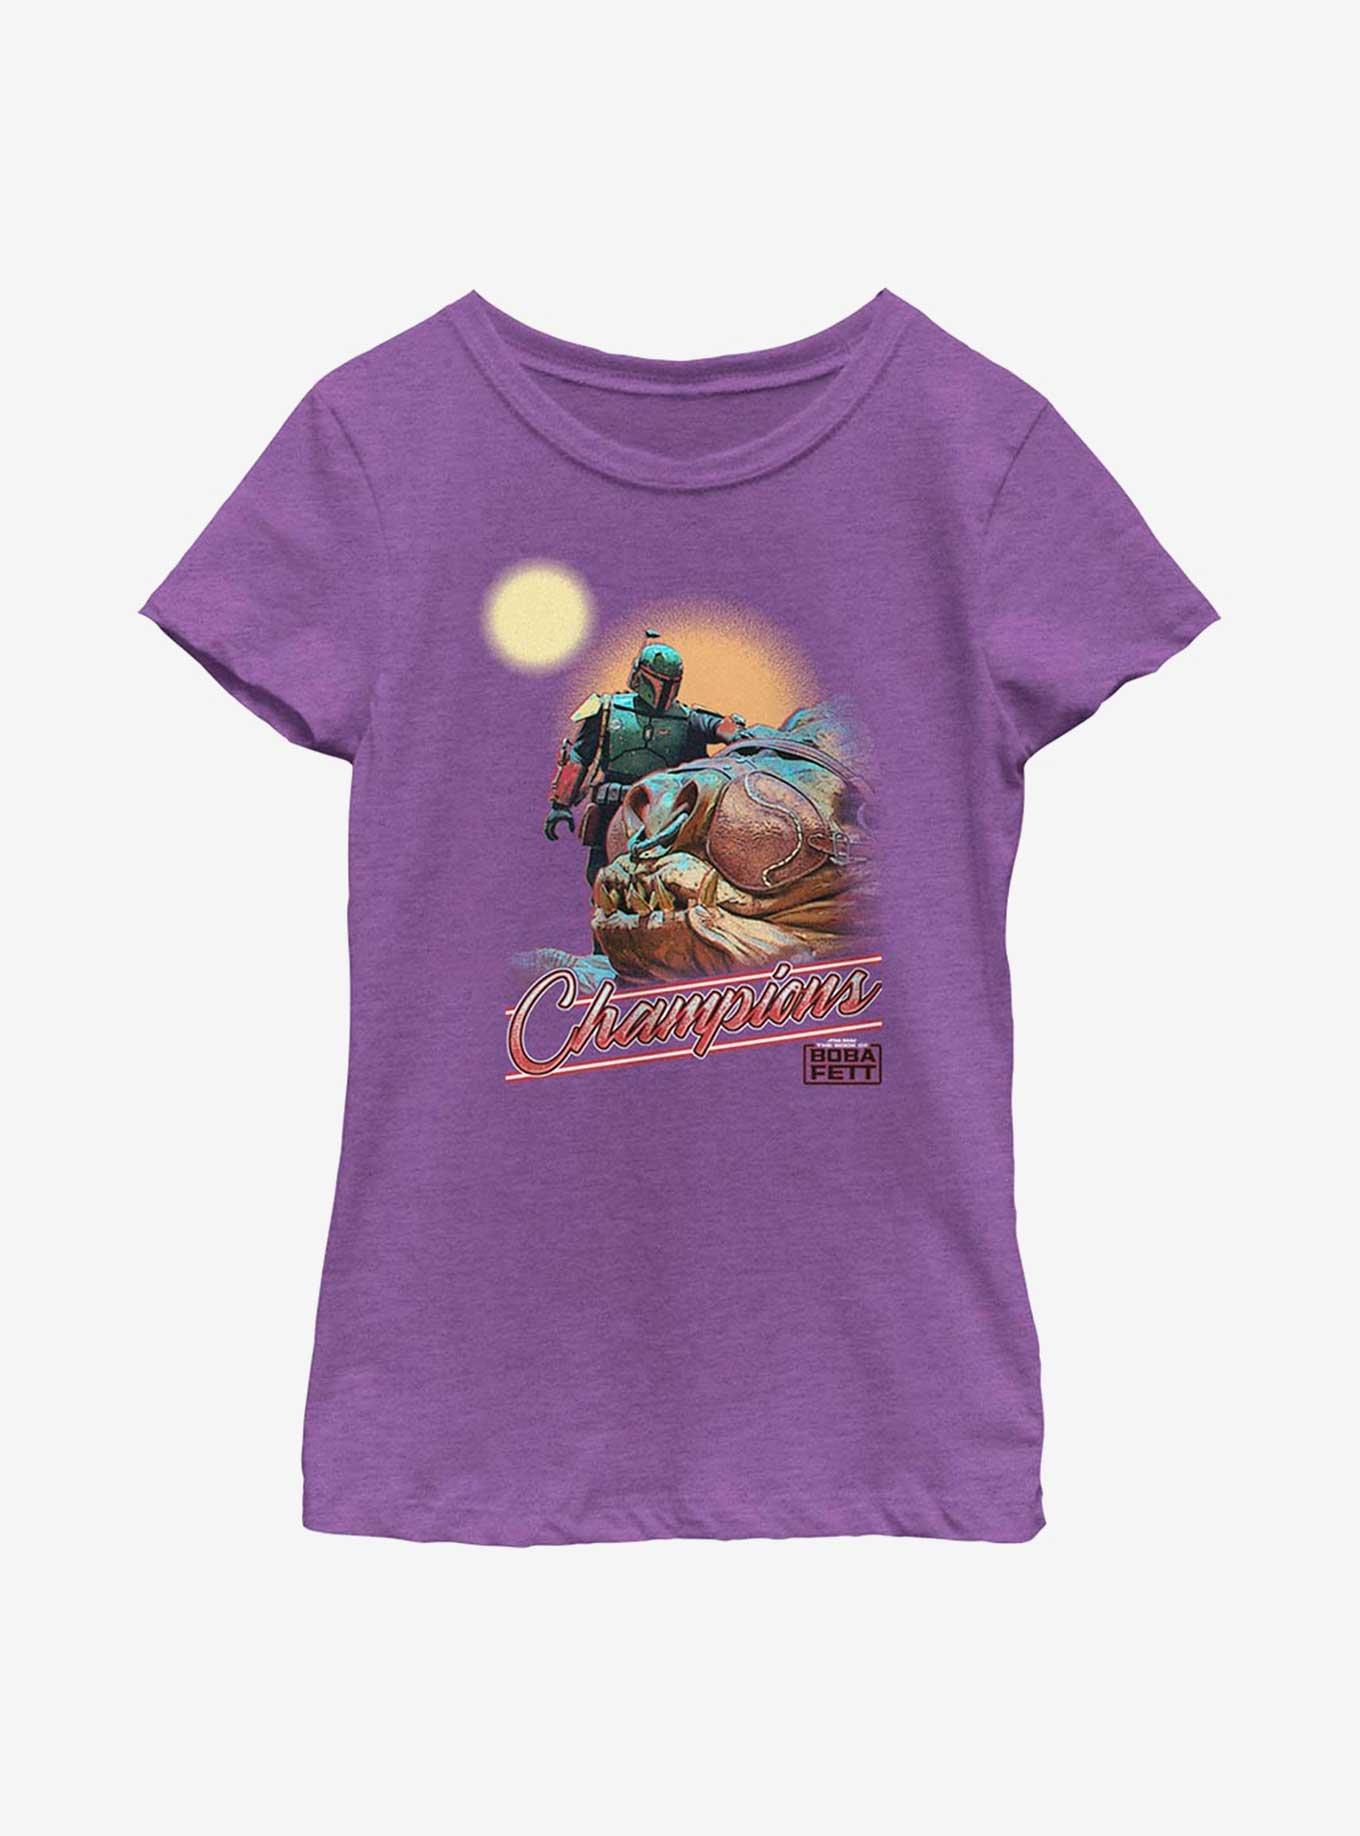 Star Wars The Book Of Boba Fett Championship Breed Youth Girls T-Shirt, PURPLE BERRY, hi-res